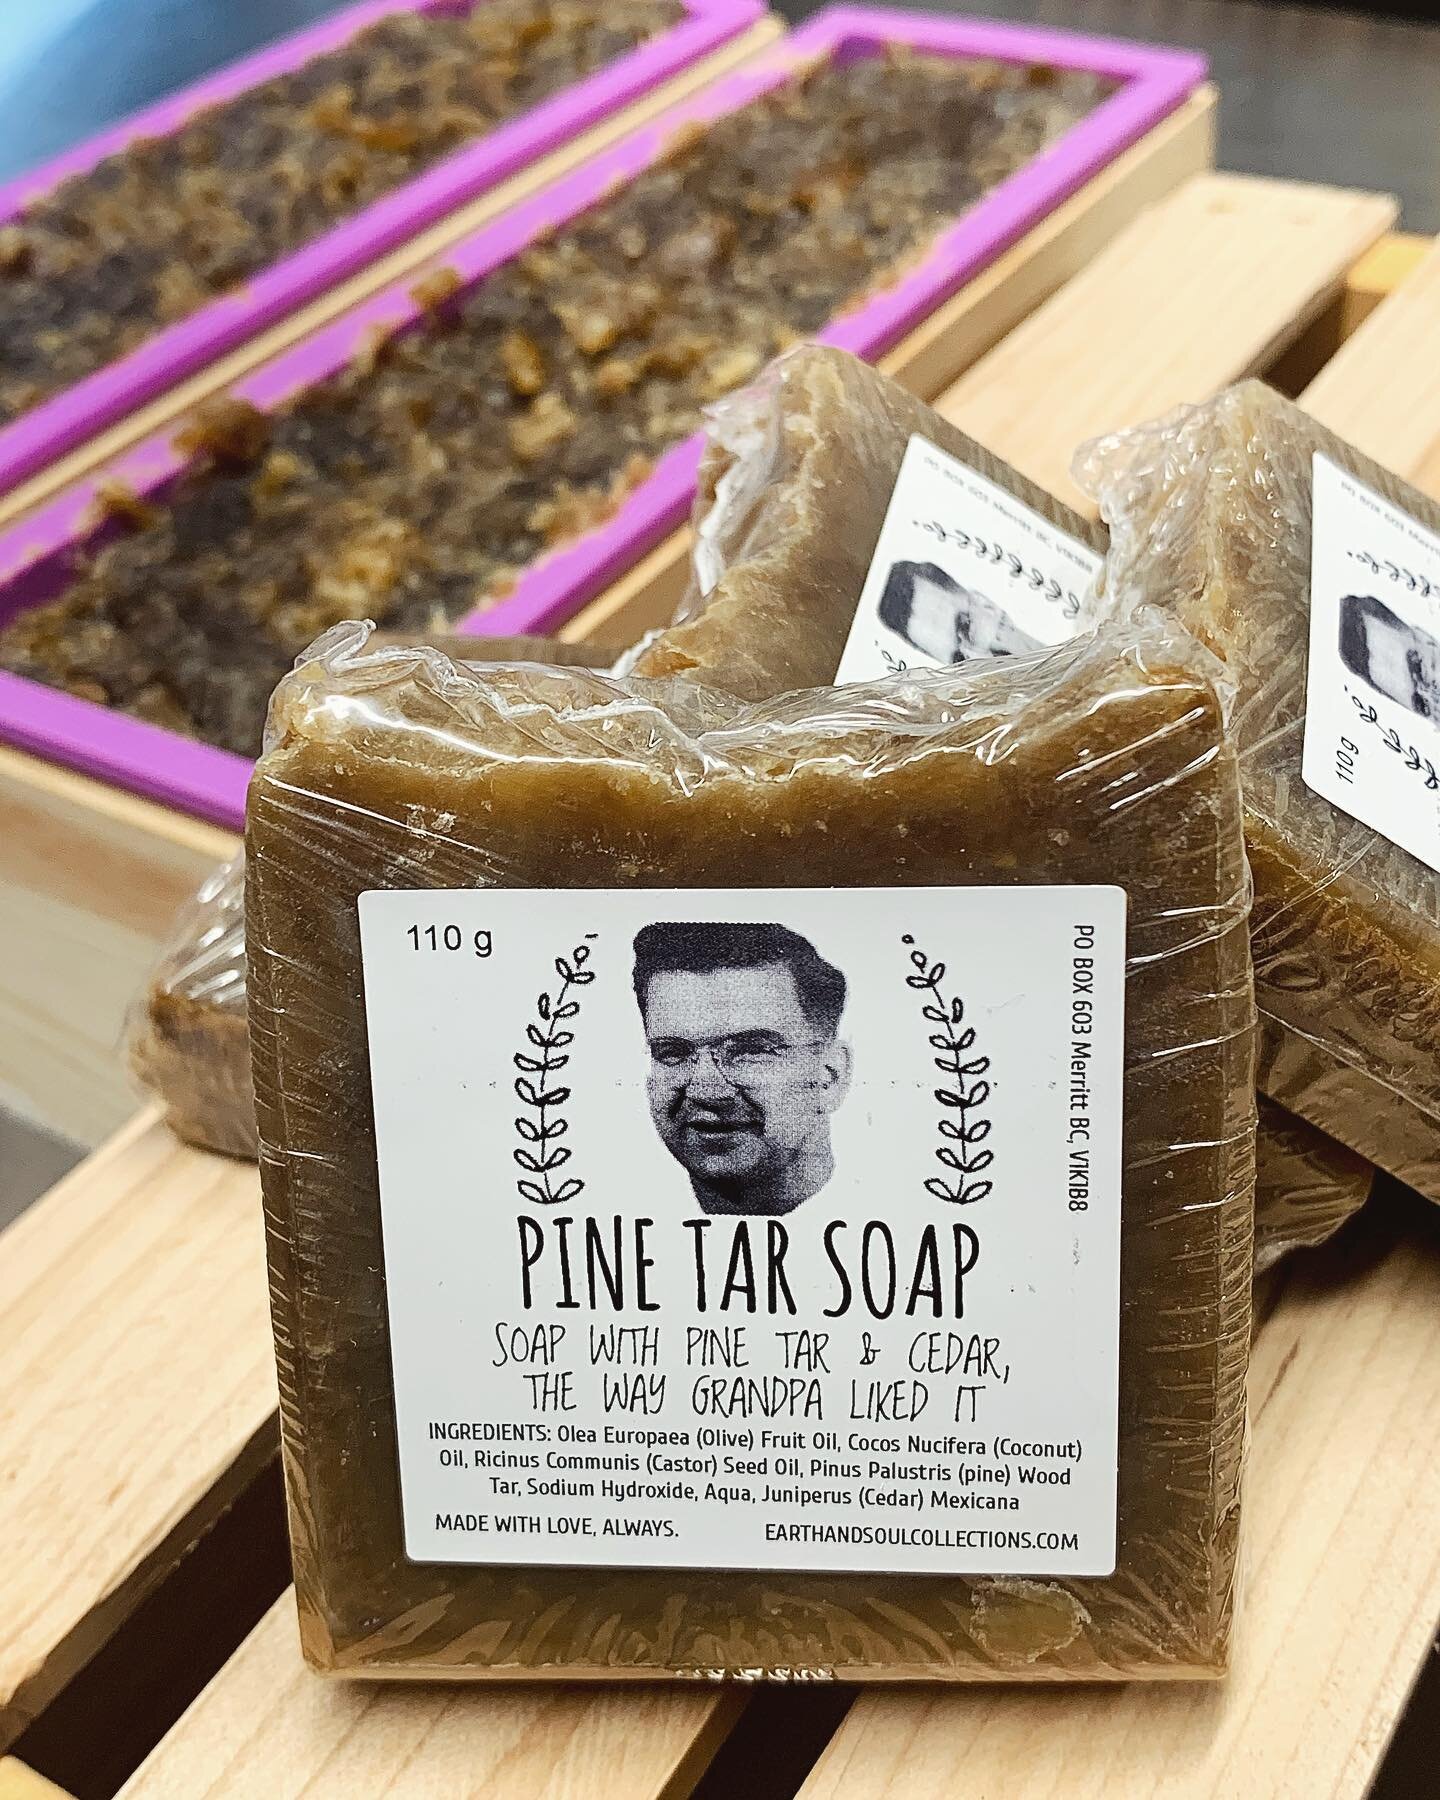 Another batch of Pine Tar Soap has been set! Our Walter Wash soap is all natural and 100% degradable. It is freshly crafted with pine tar and is scented just right with cedar, the way Grandpa liked it

Pine tar soap is an excellent choice for dry ski